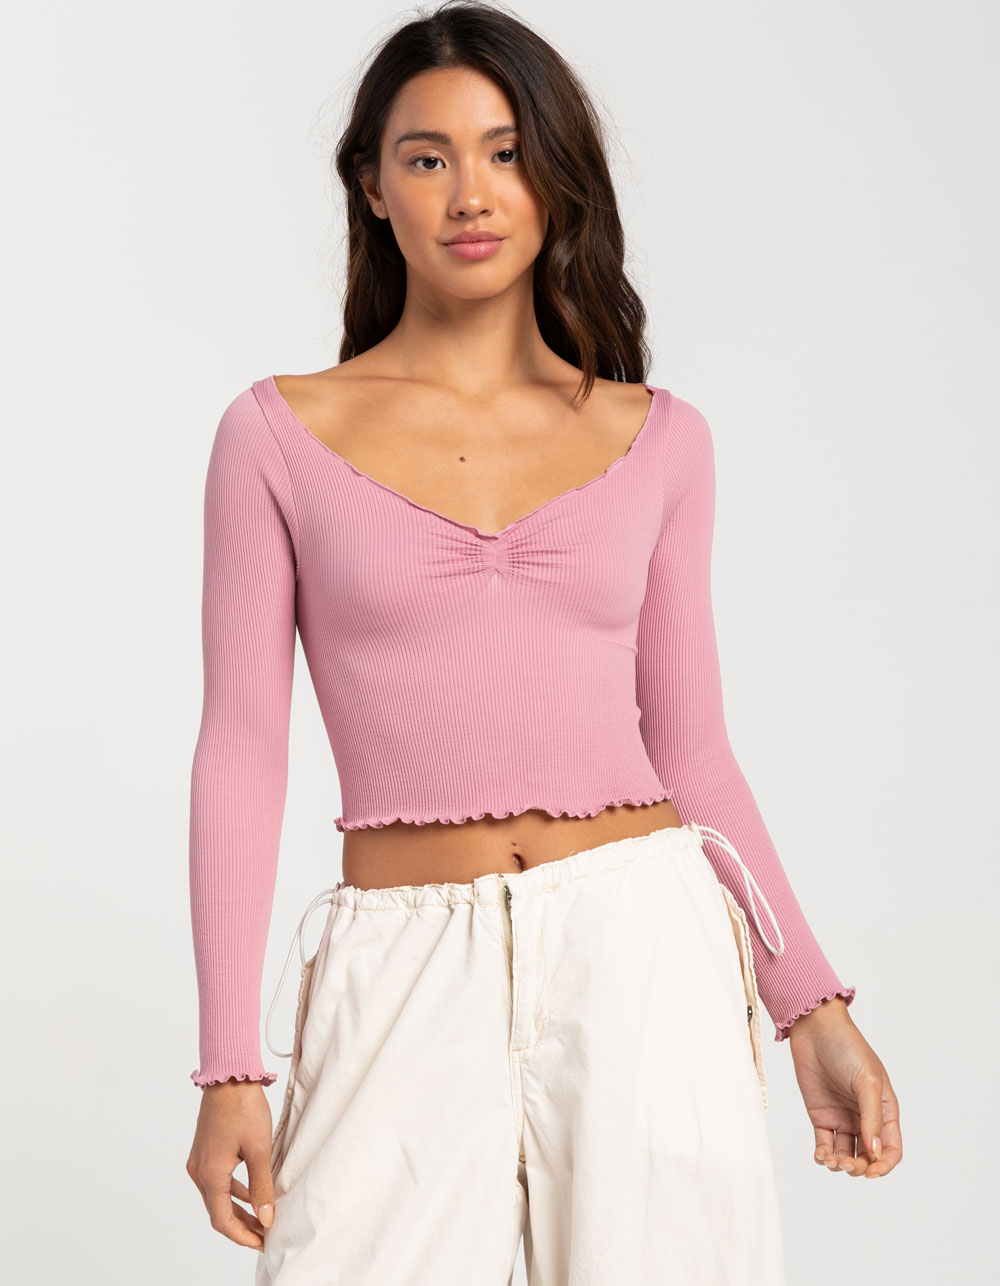 Urban Outfitters Out From Under High Tide Seamless Scoop Neck